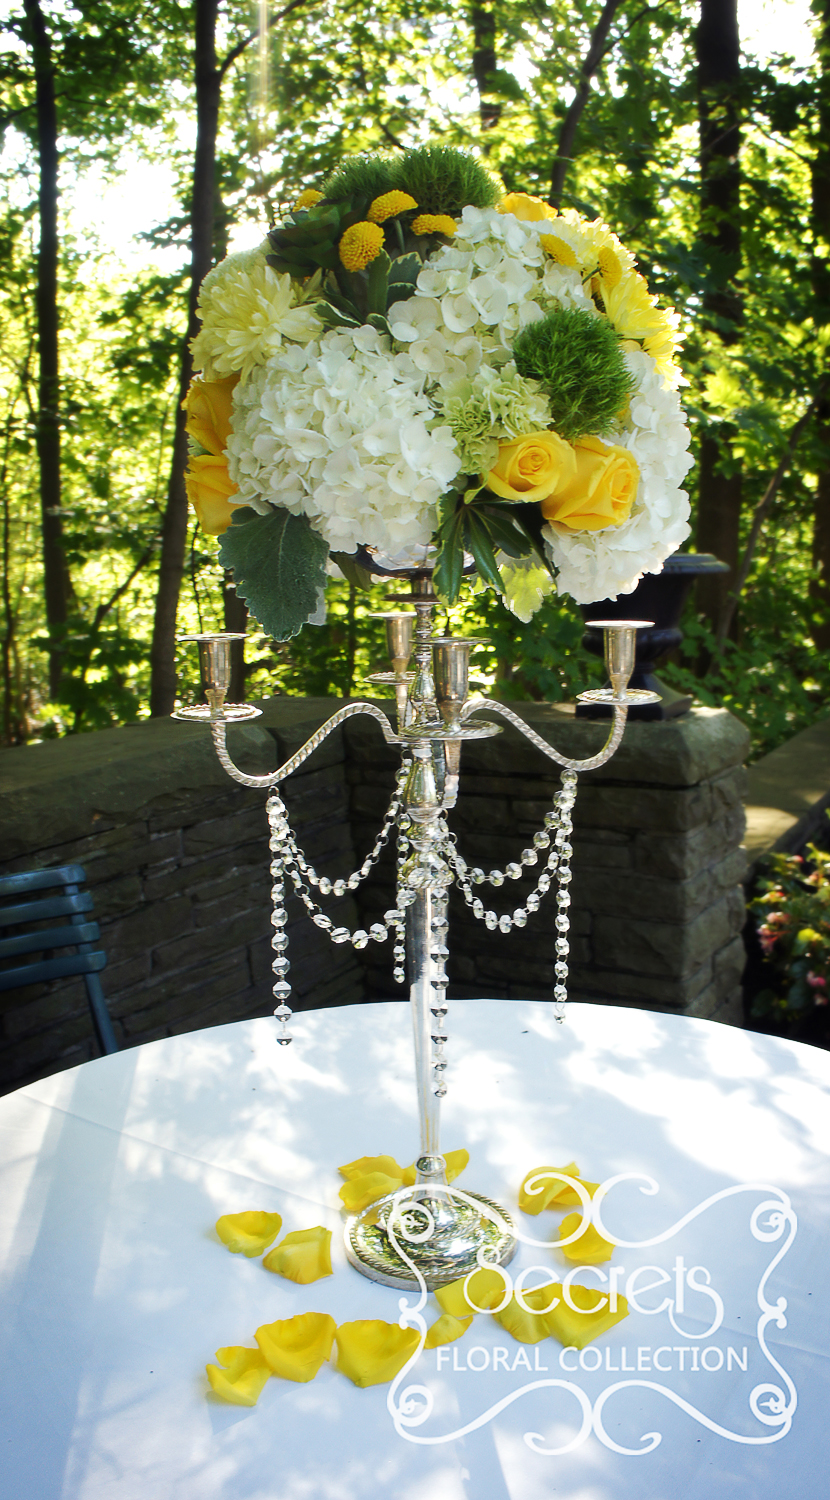 Elevated cream, green, and yellow centrepieces were used in the ceremony as well